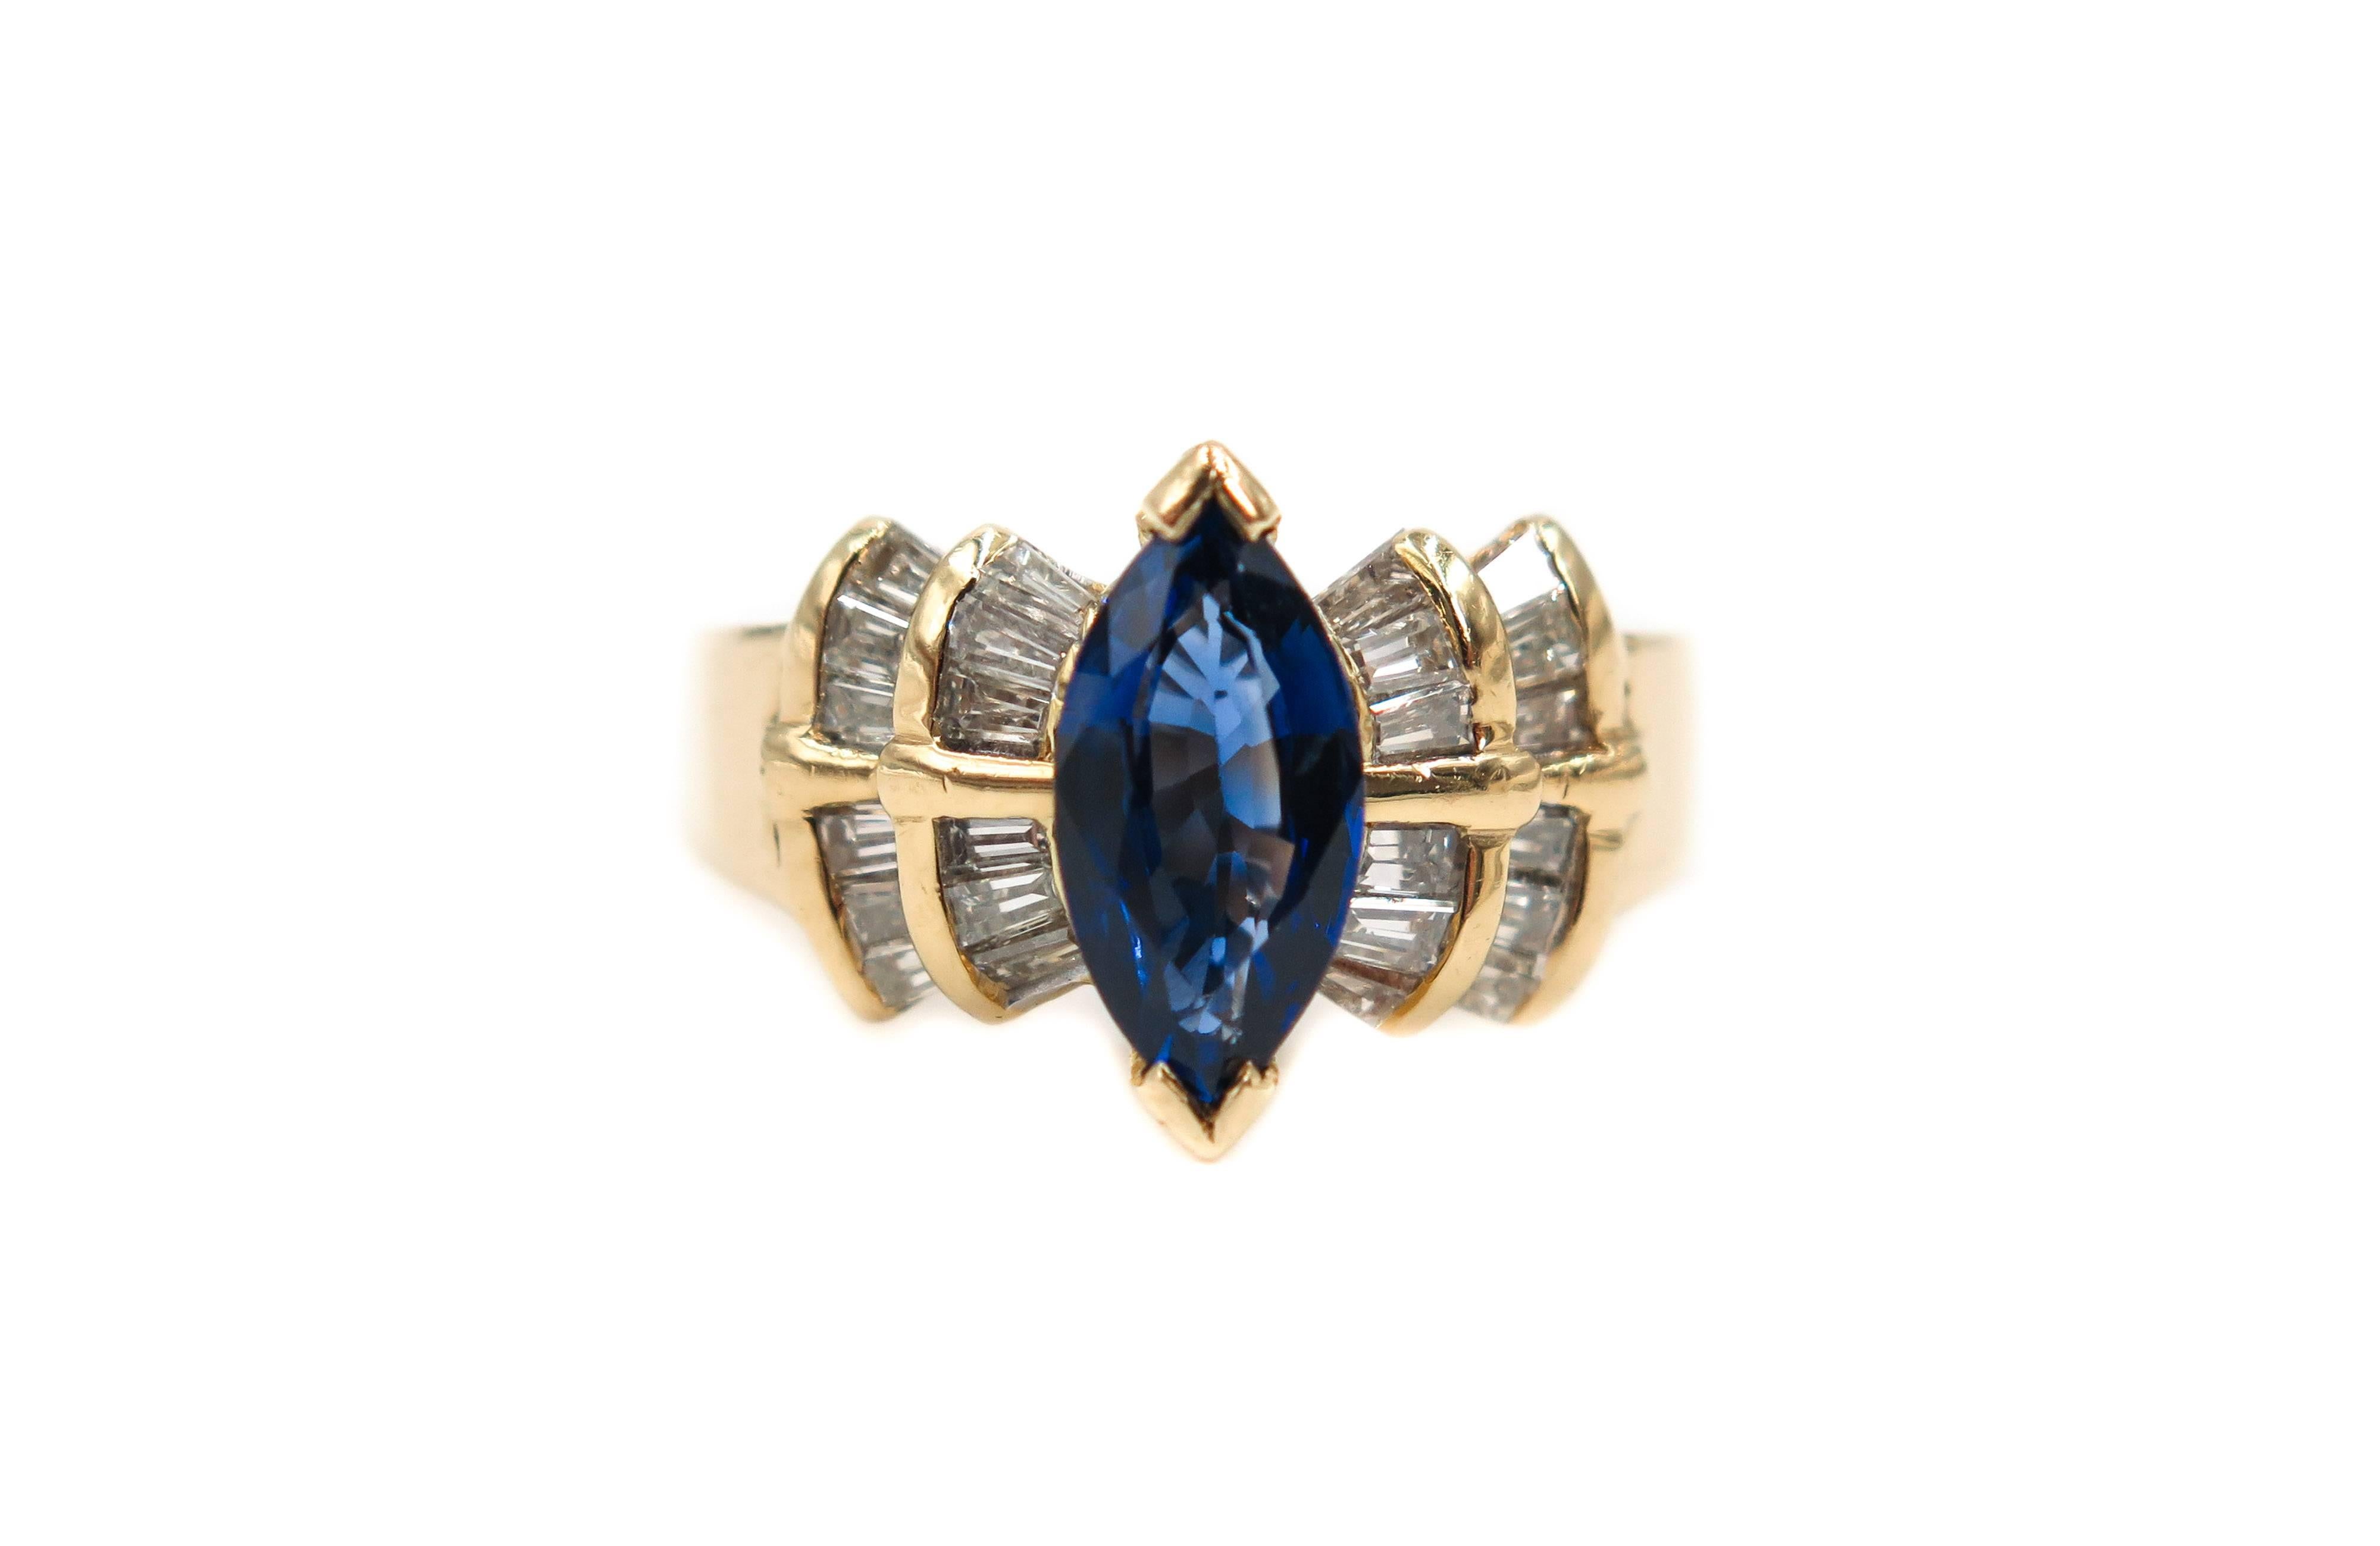 This Estate Ring is a classic design, centered is a 1 carat marquise cut blue sapphire. Accented on either side by layers of tapered diamond baguettes, weighing approximately 0.50 carats. Crafted in 18k yellow gold.
Ring finger size 7